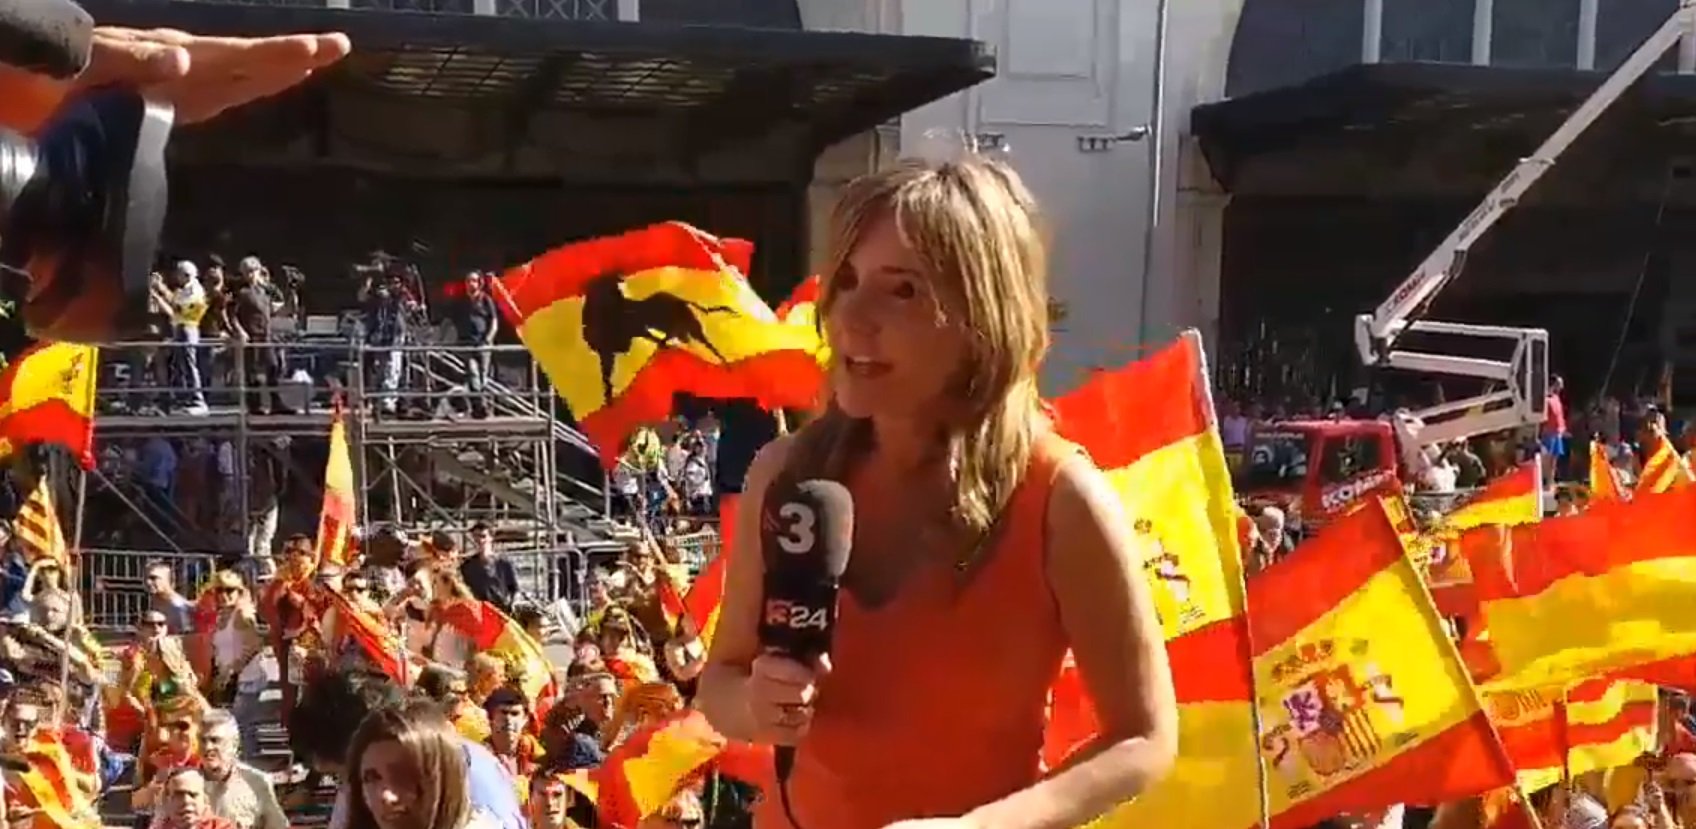 Sexist abuse of Catalan TV presenter at unionist march